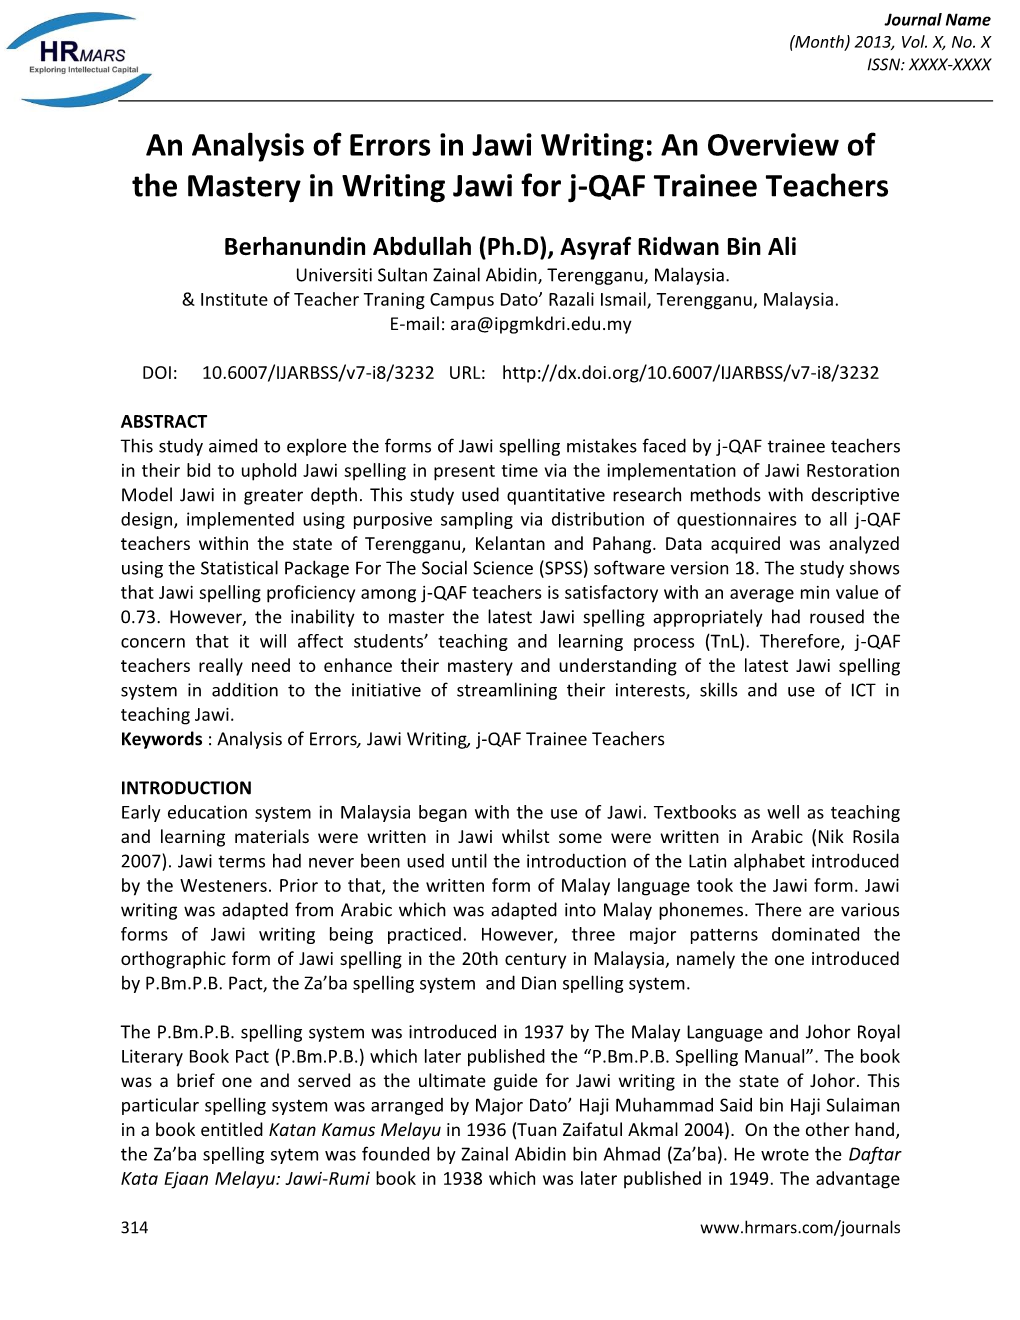 An Overview of the Mastery in Writing Jawi for J-QAF Trainee Teachers